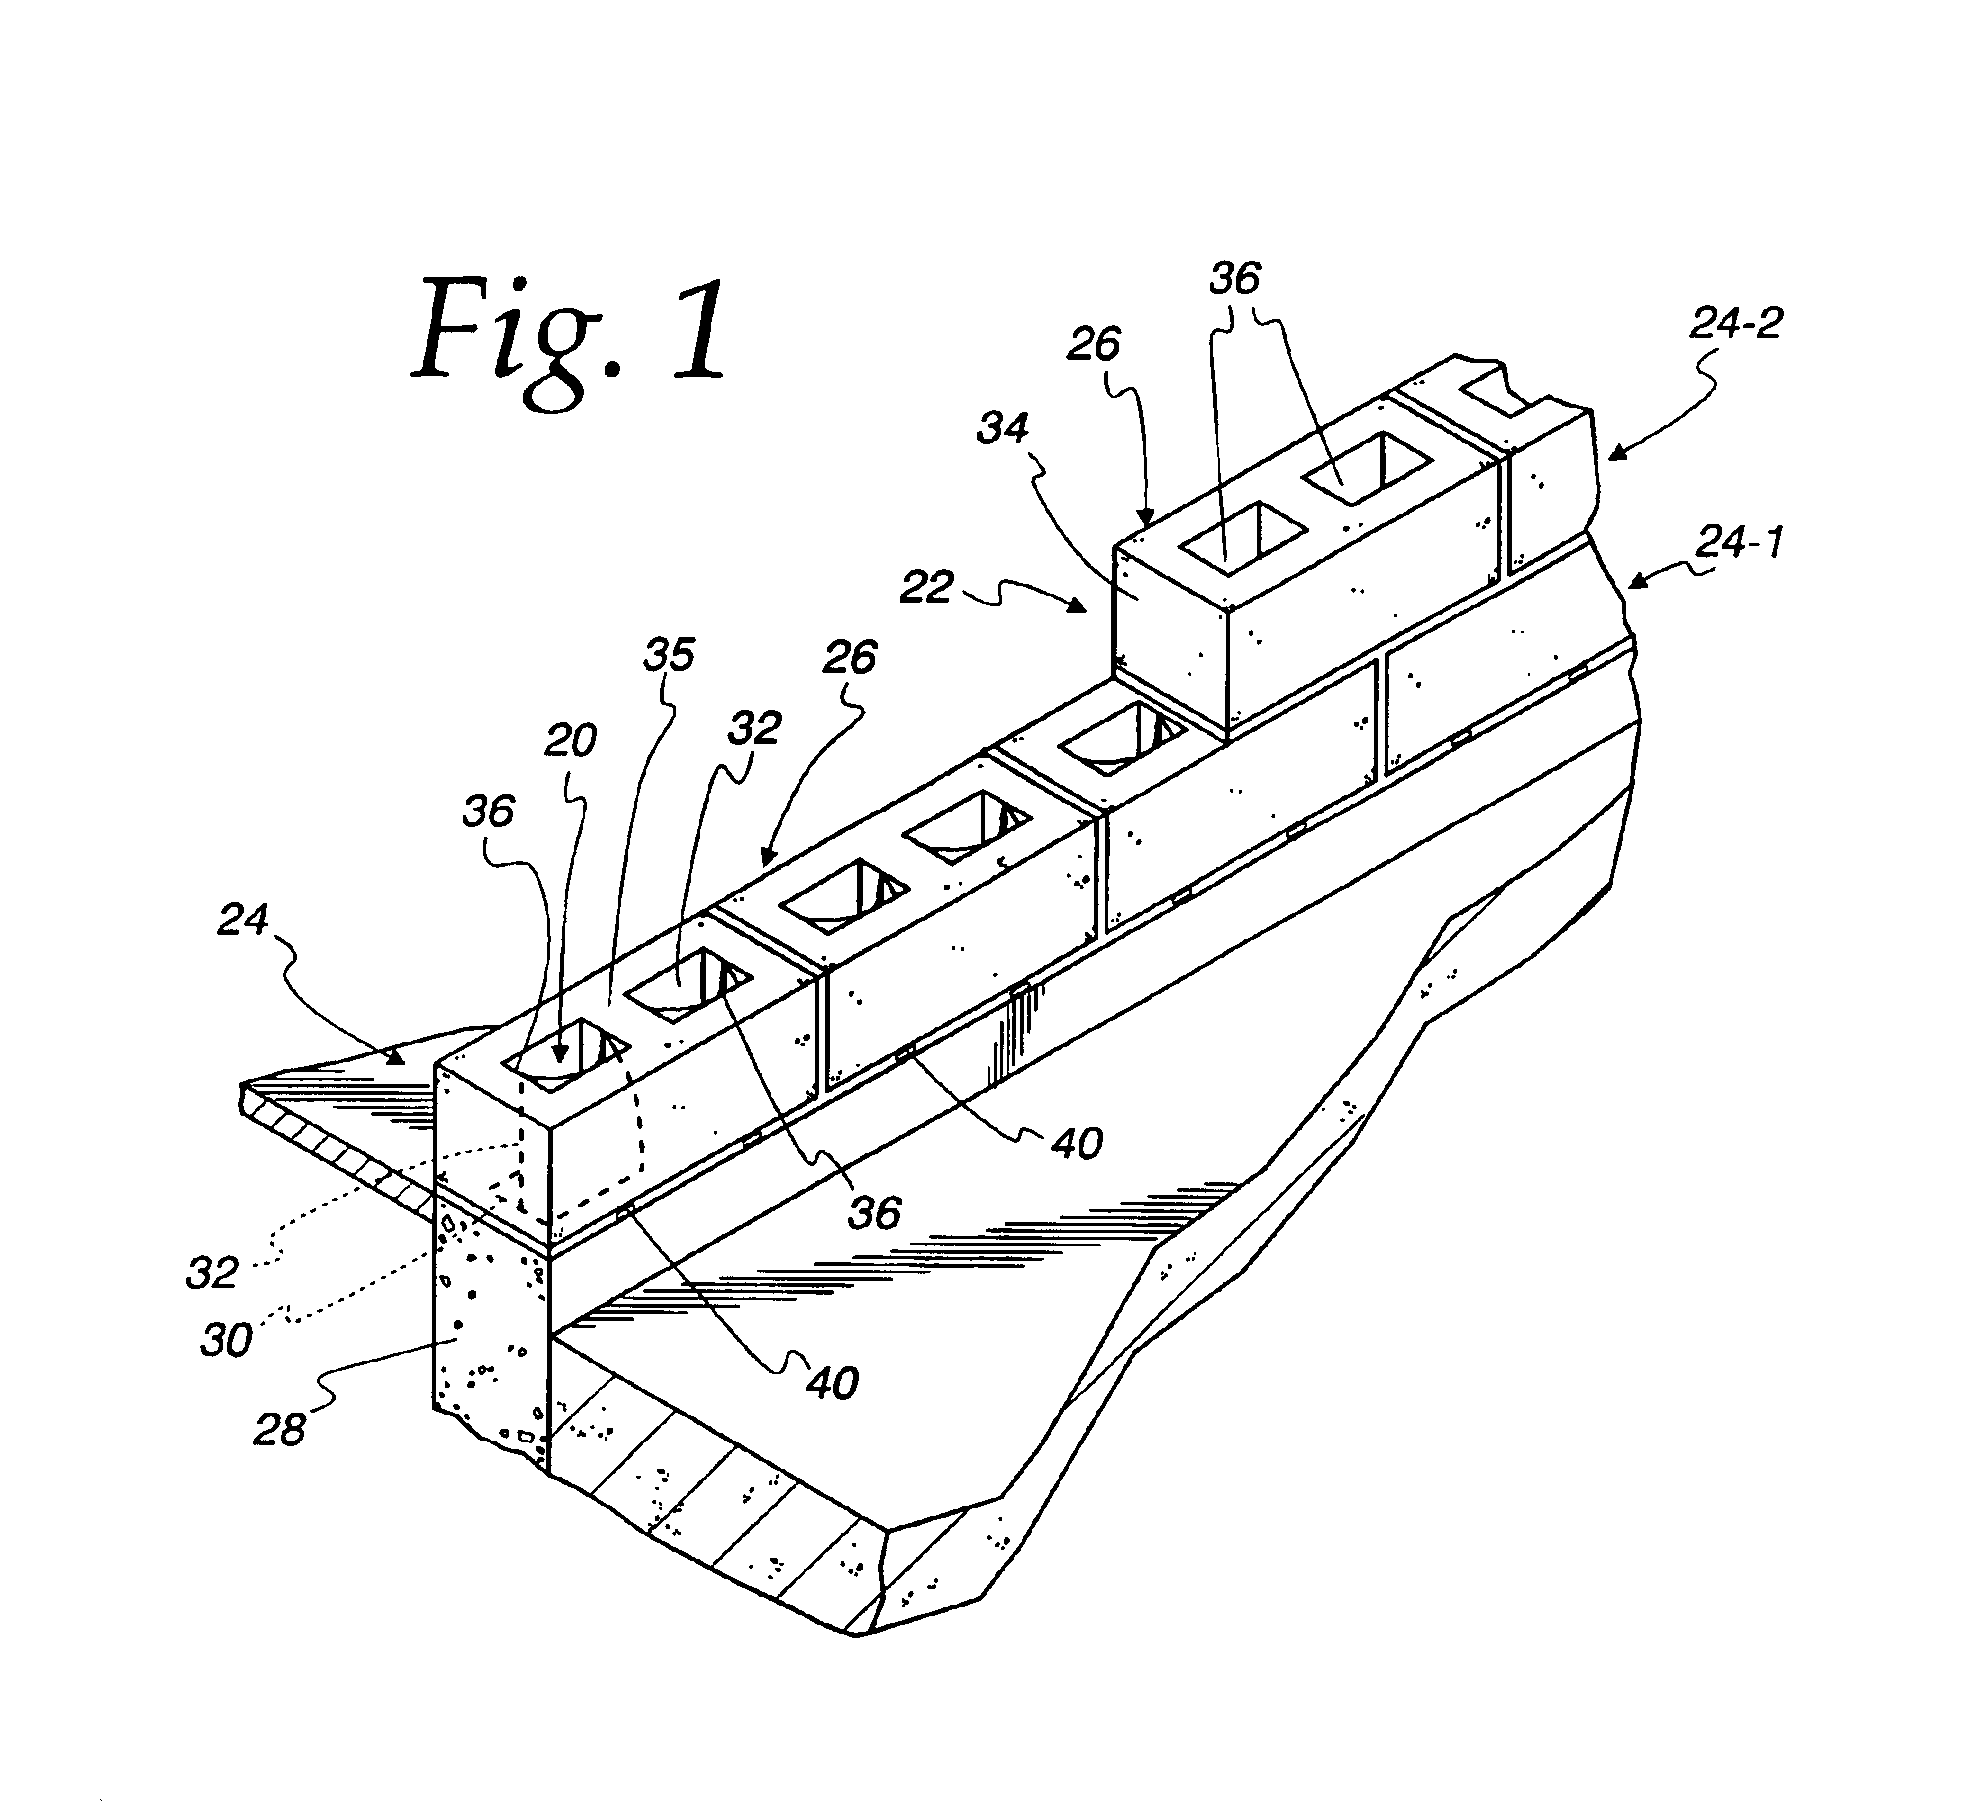 Drainage system for use in masonry block construction